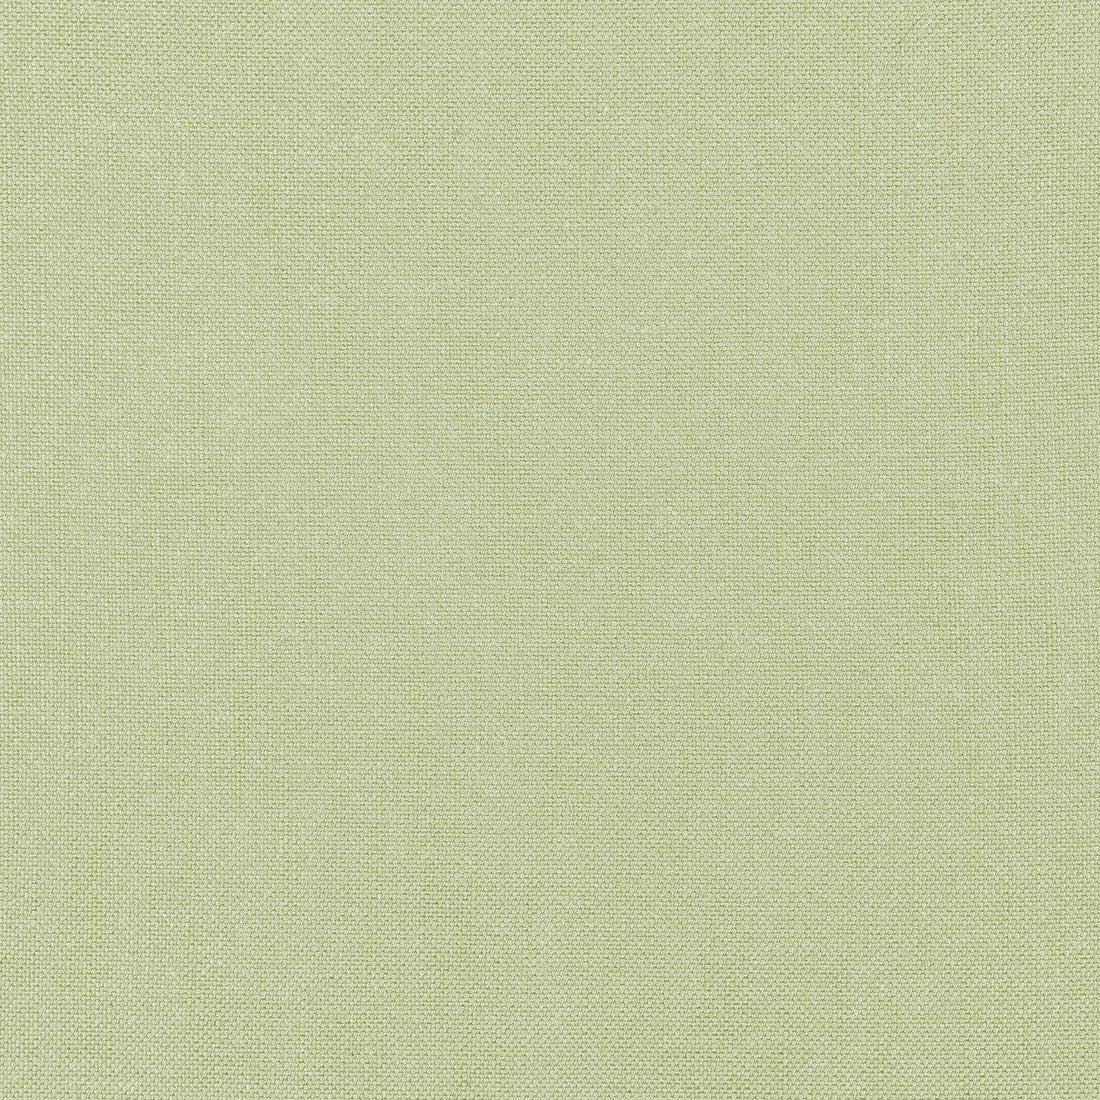 Palisade Linen fabric in celadon color - pattern number FWW7623 - by Thibaut in the Palisades collection